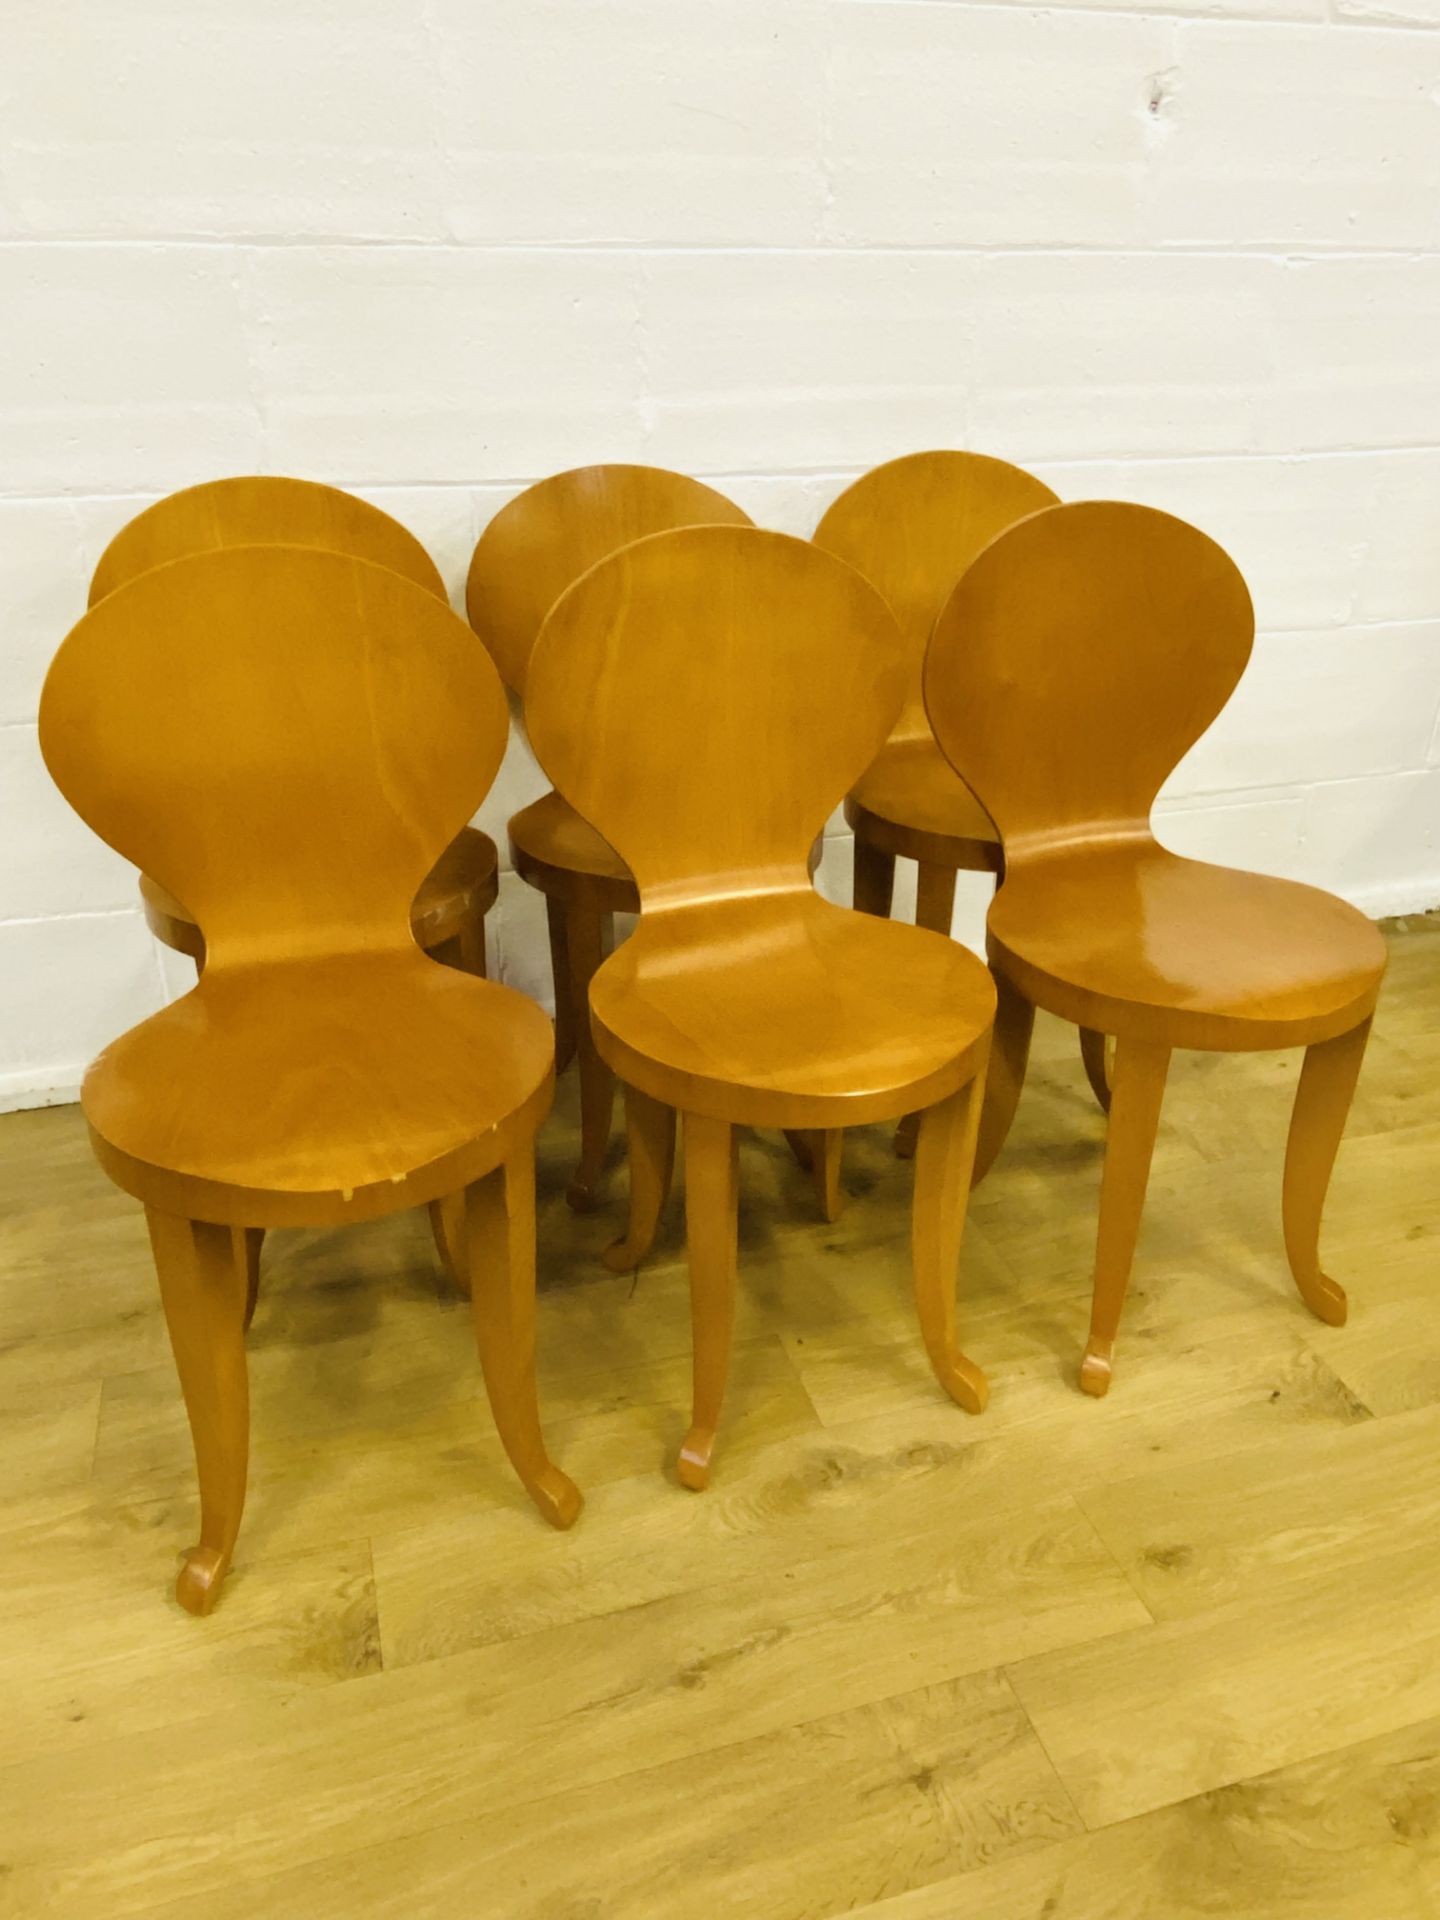 Six 'ant' style wood chairs - Image 3 of 5